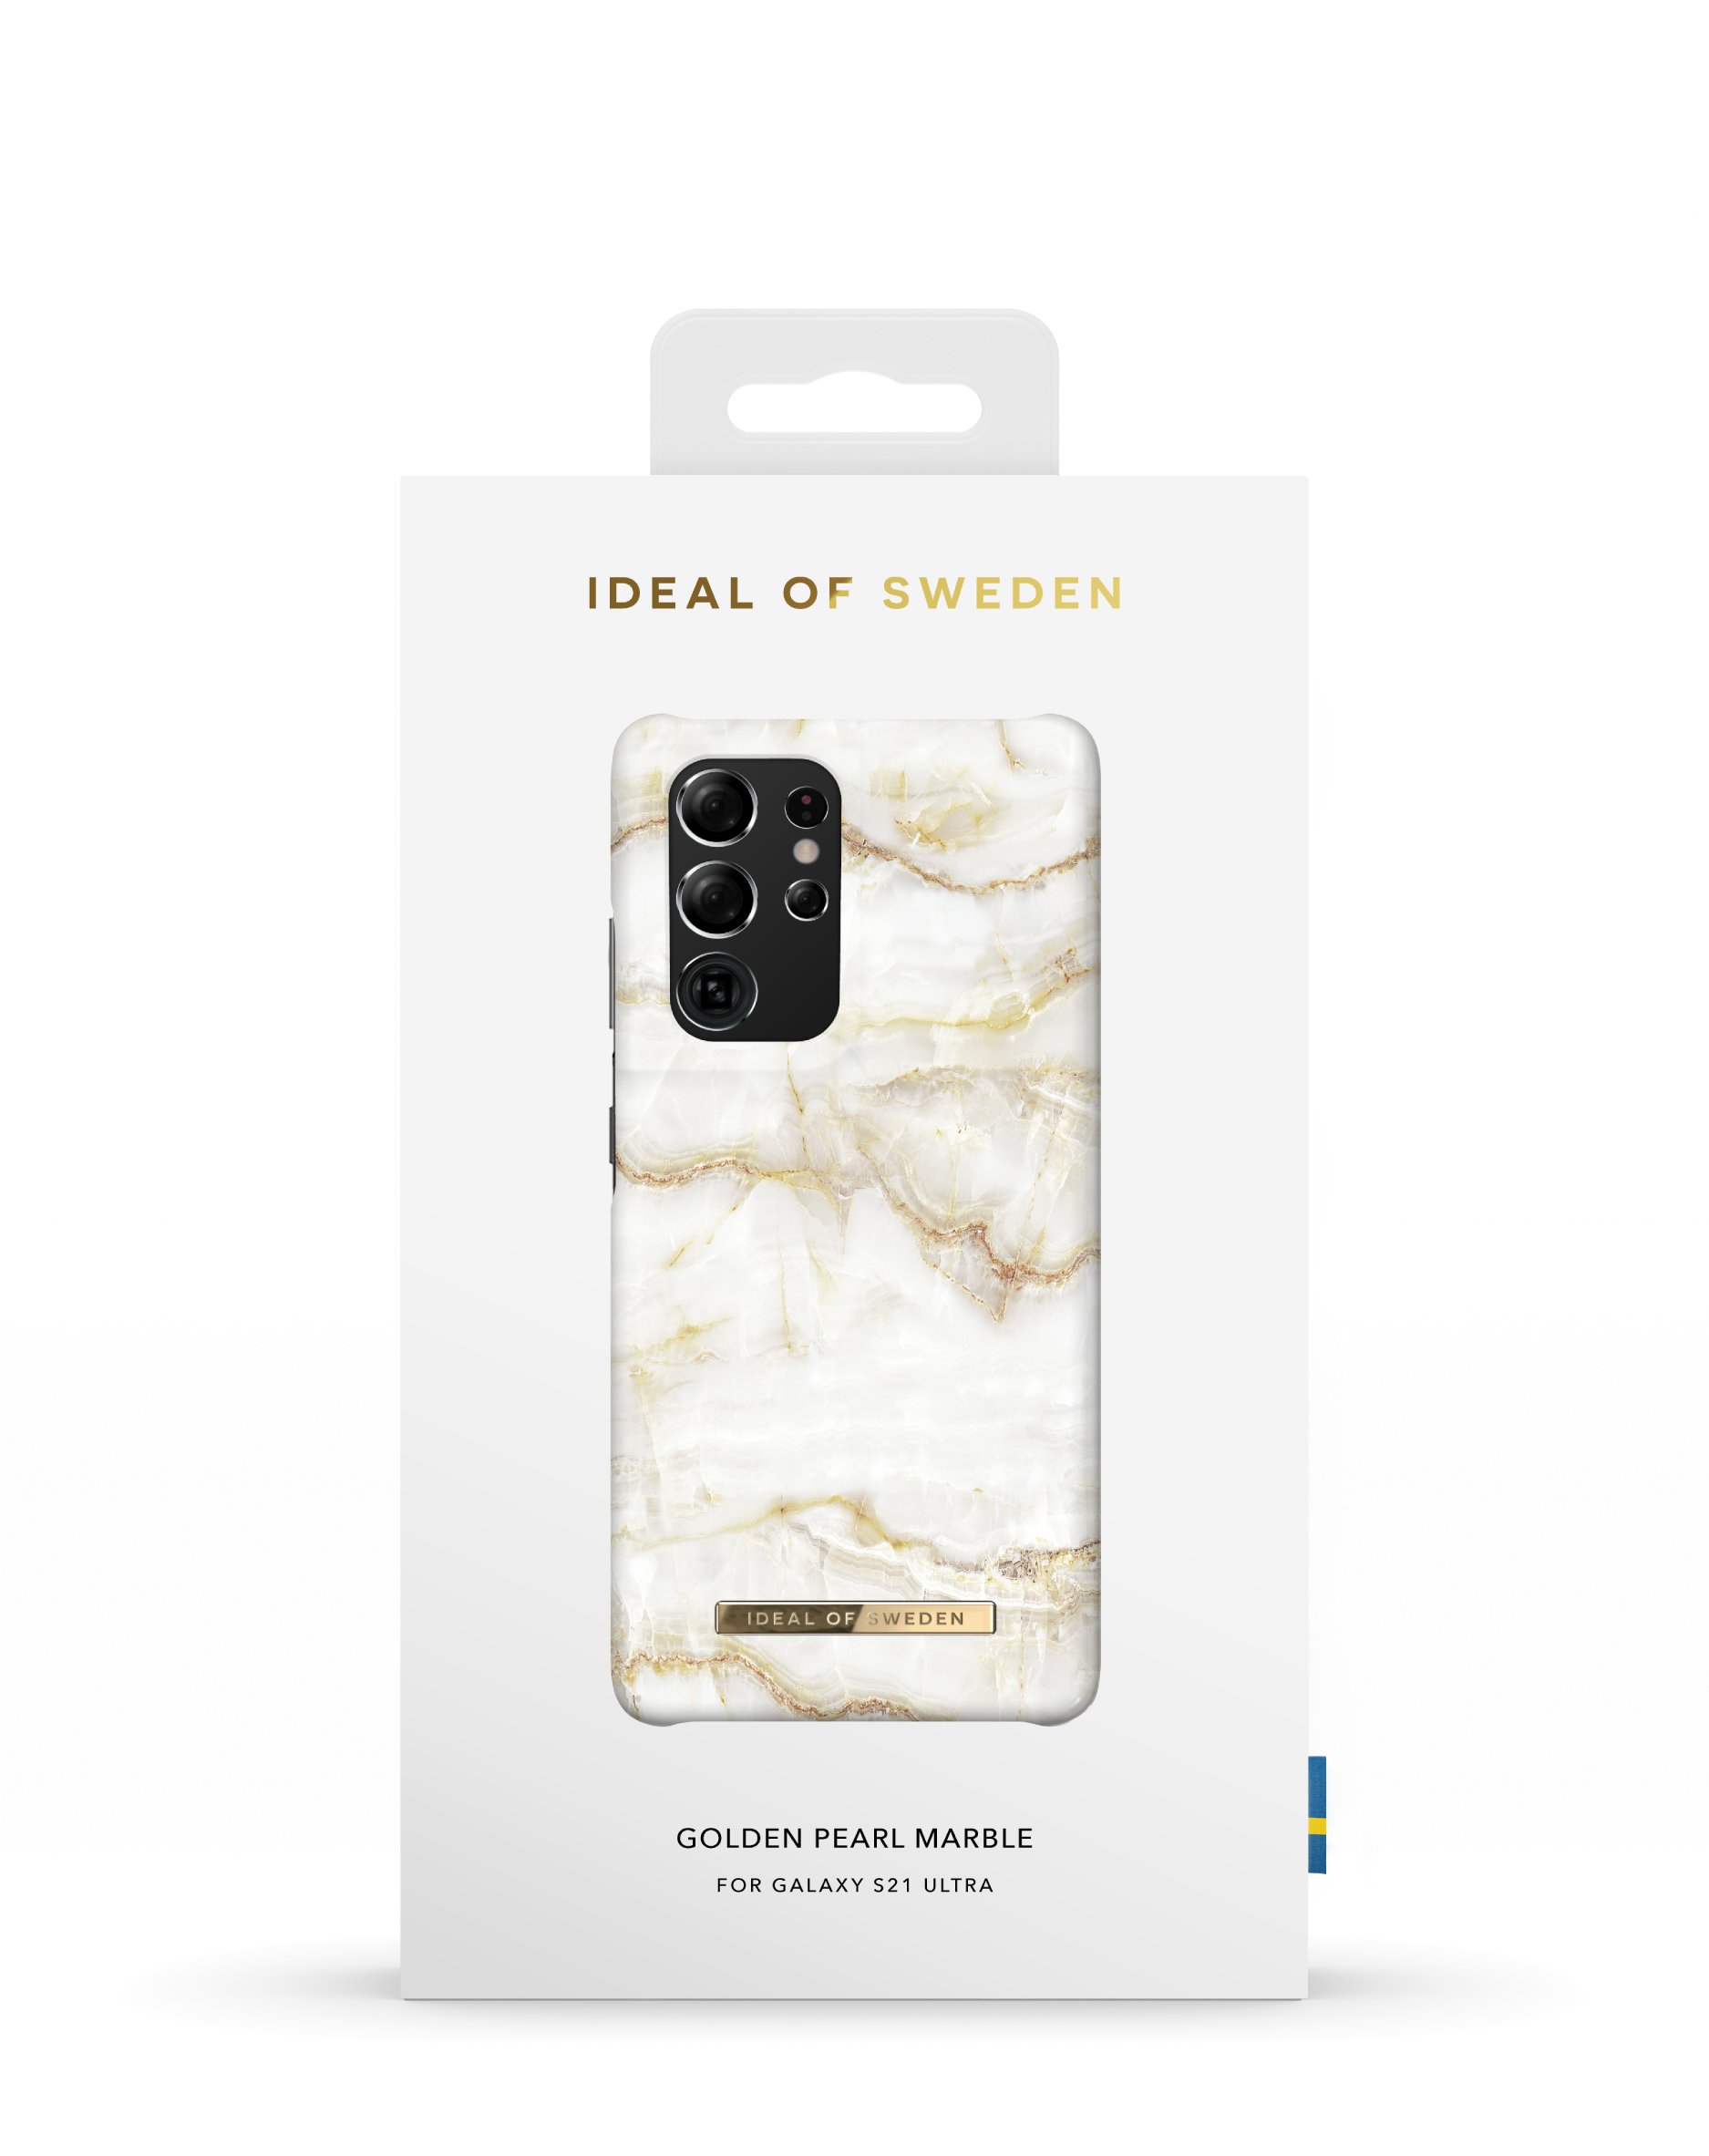 S21 SWEDEN OF Golden Pearl Backcover, IDEAL Samsung, IDFCSS20-S21U-194, Ultra, Galaxy Marble